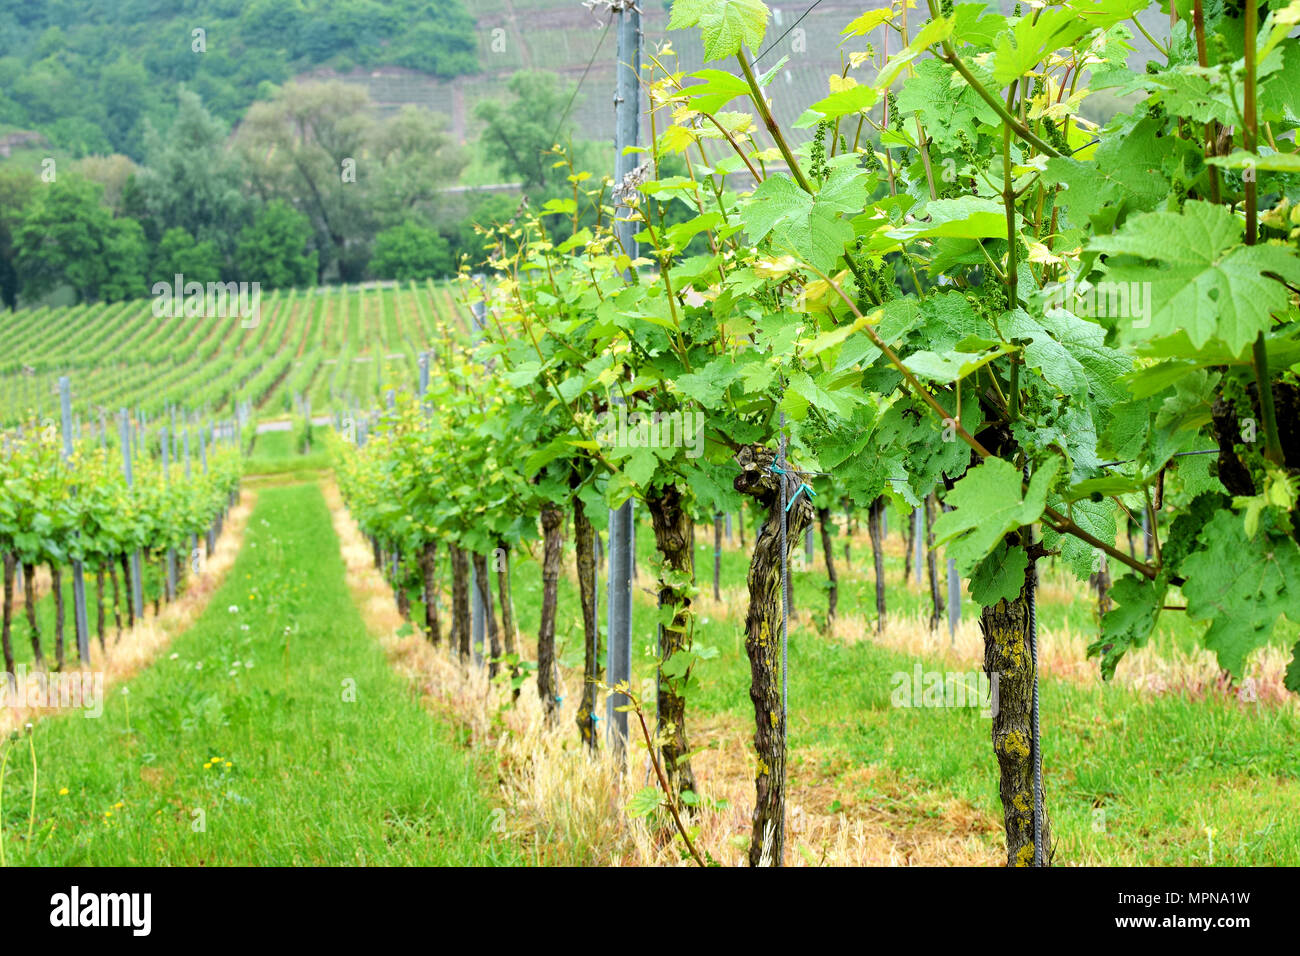 Vineyards at the Moselle Valley, Germany Stock Photo